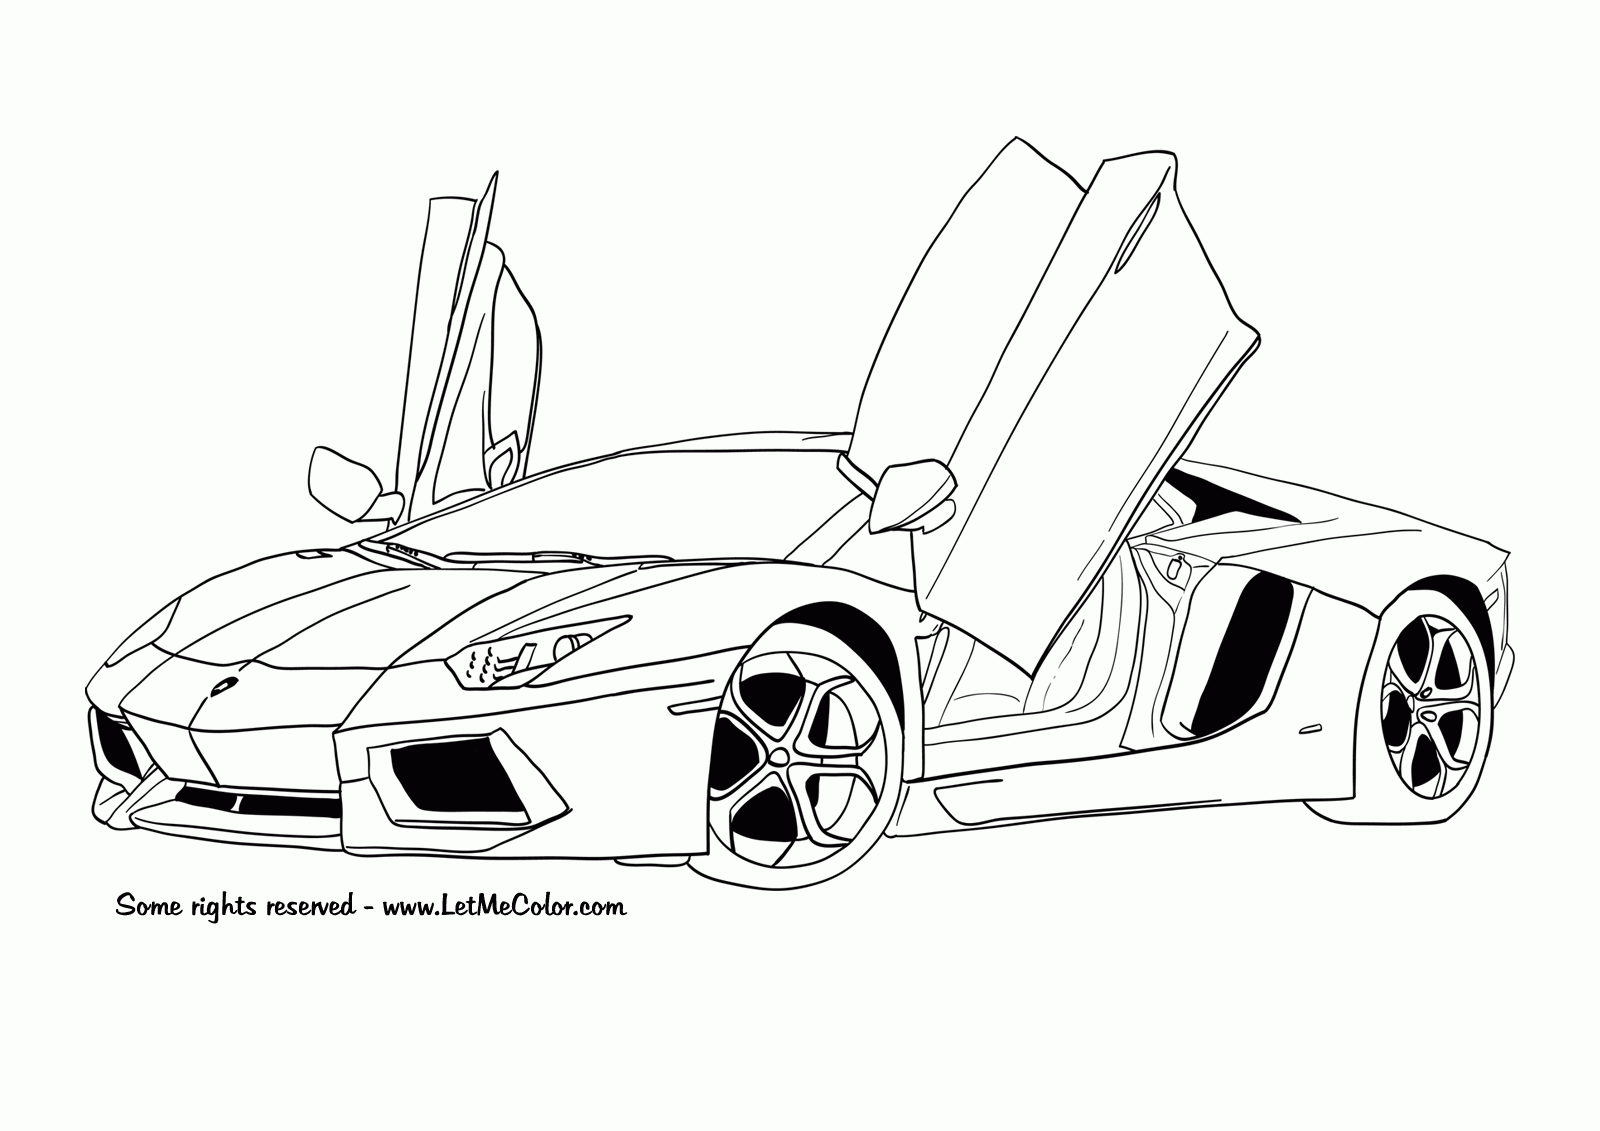 13 Pics Of Car Cool Lamborghini Coloring Pages How To